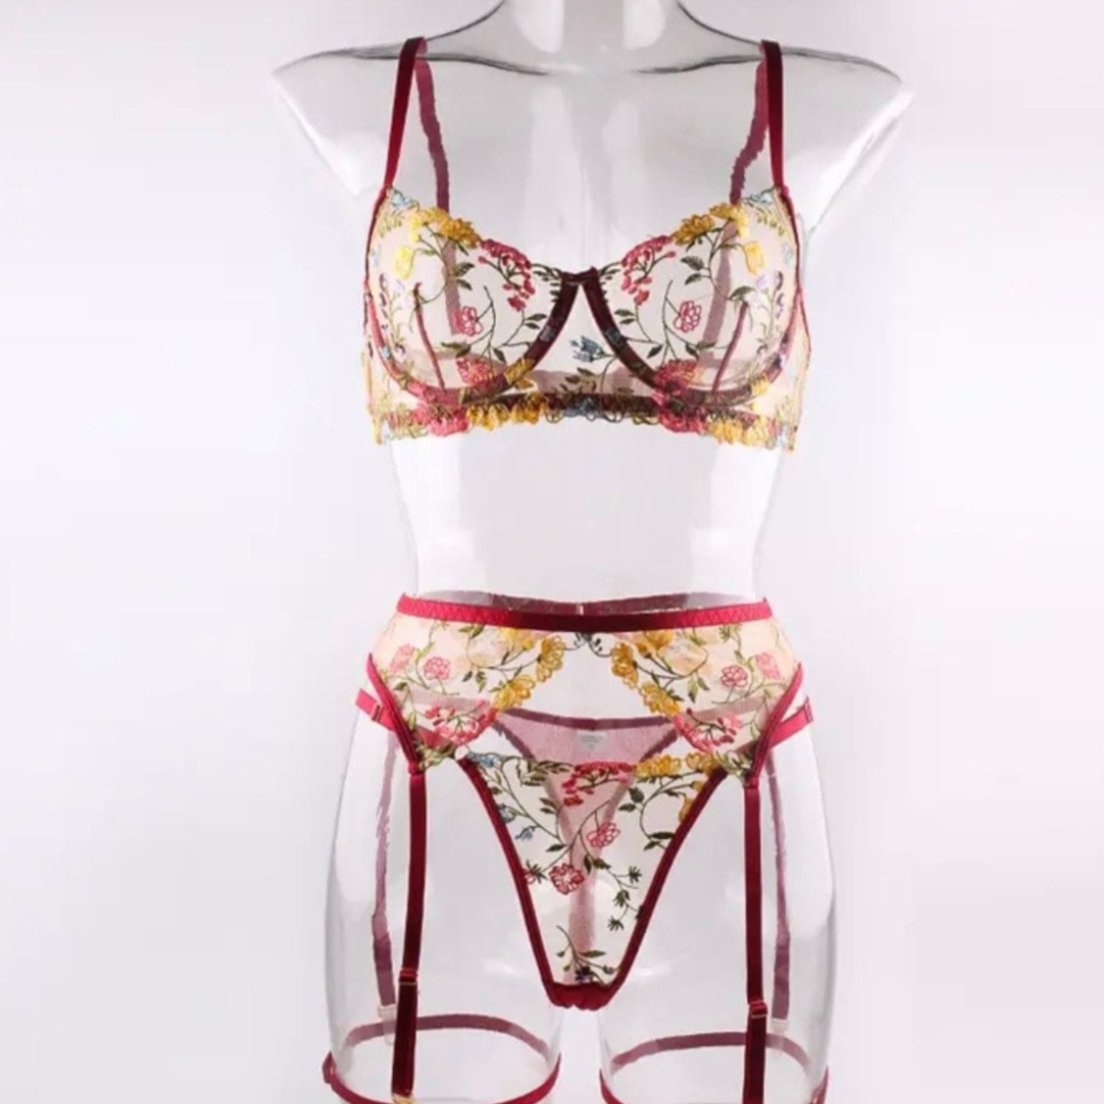 red lingerie embroidered floral